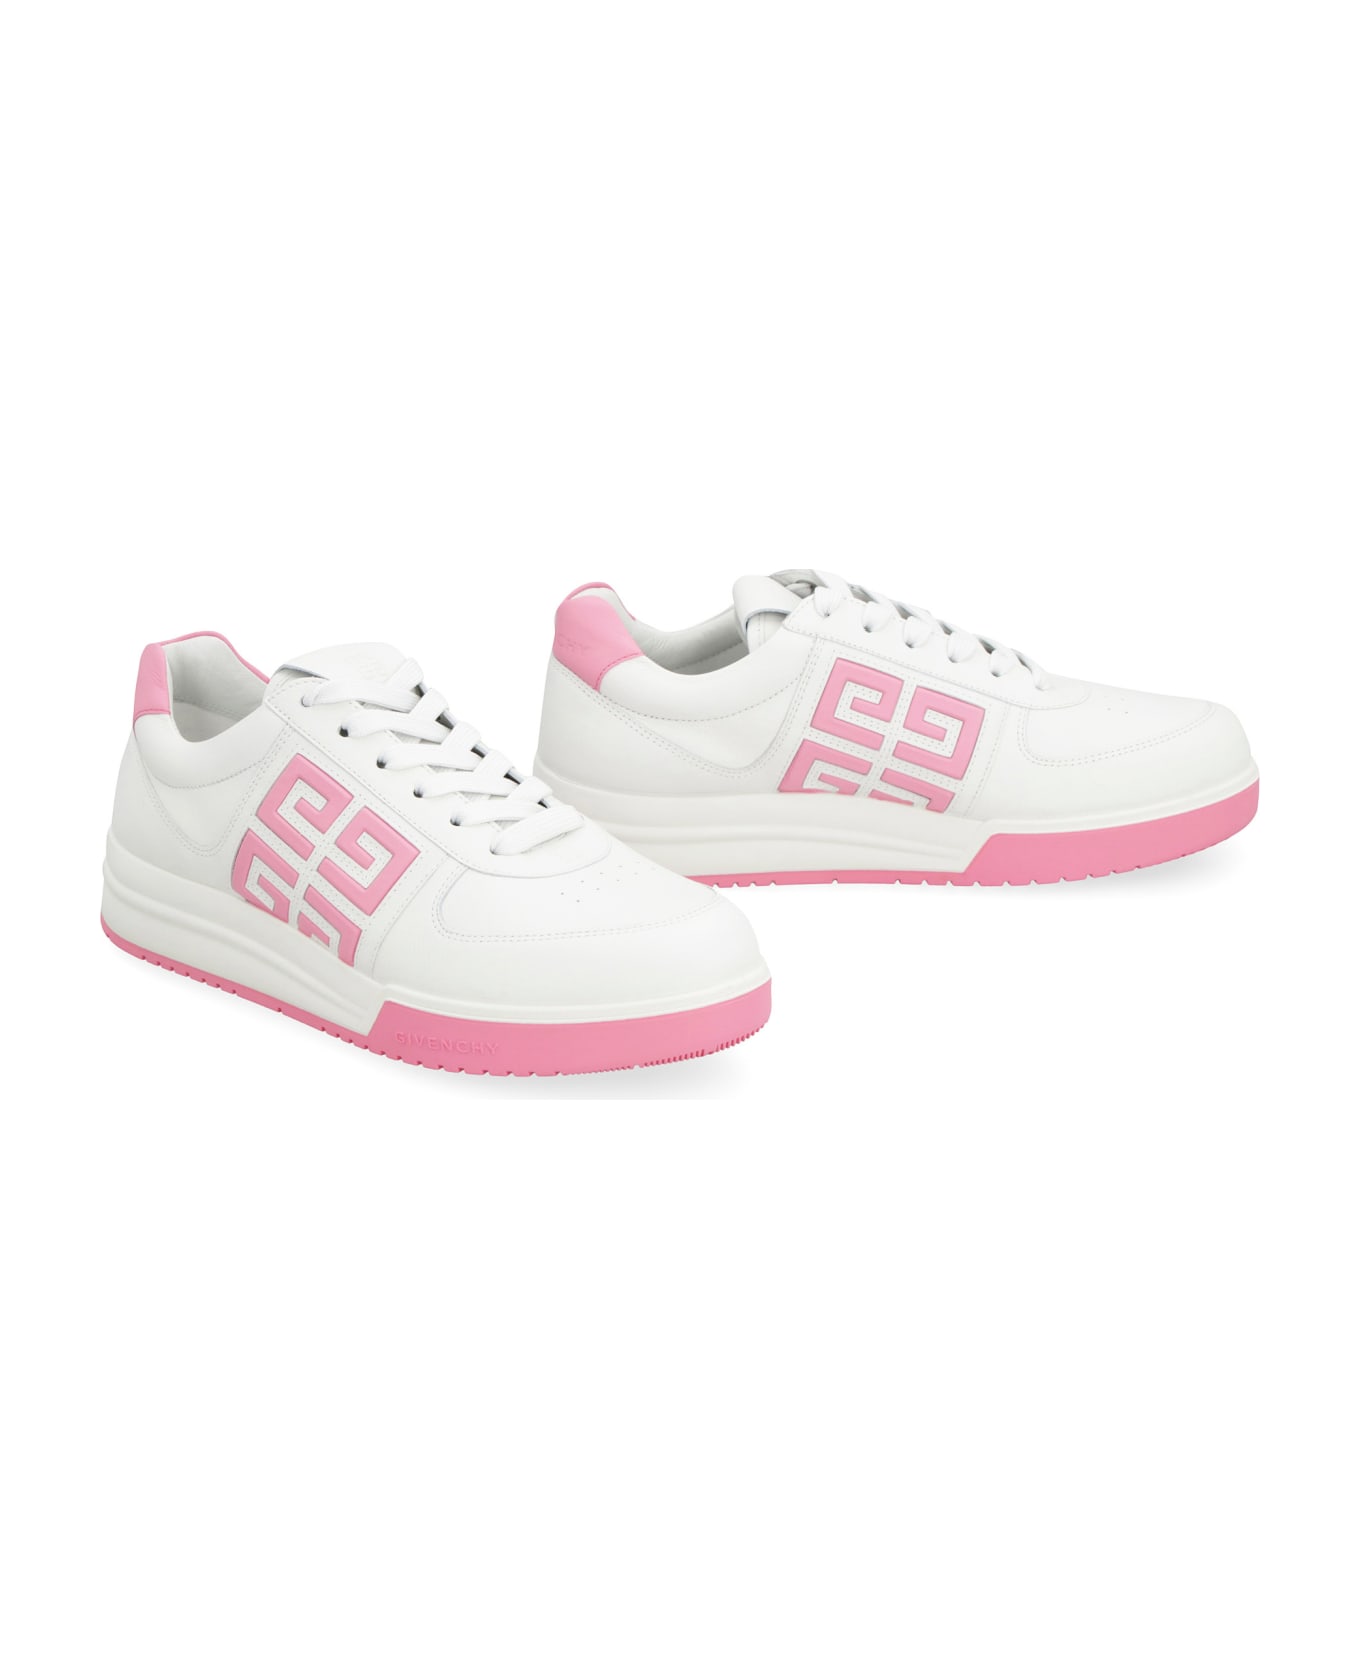 Givenchy G4 Low-top Sneakers - Pink